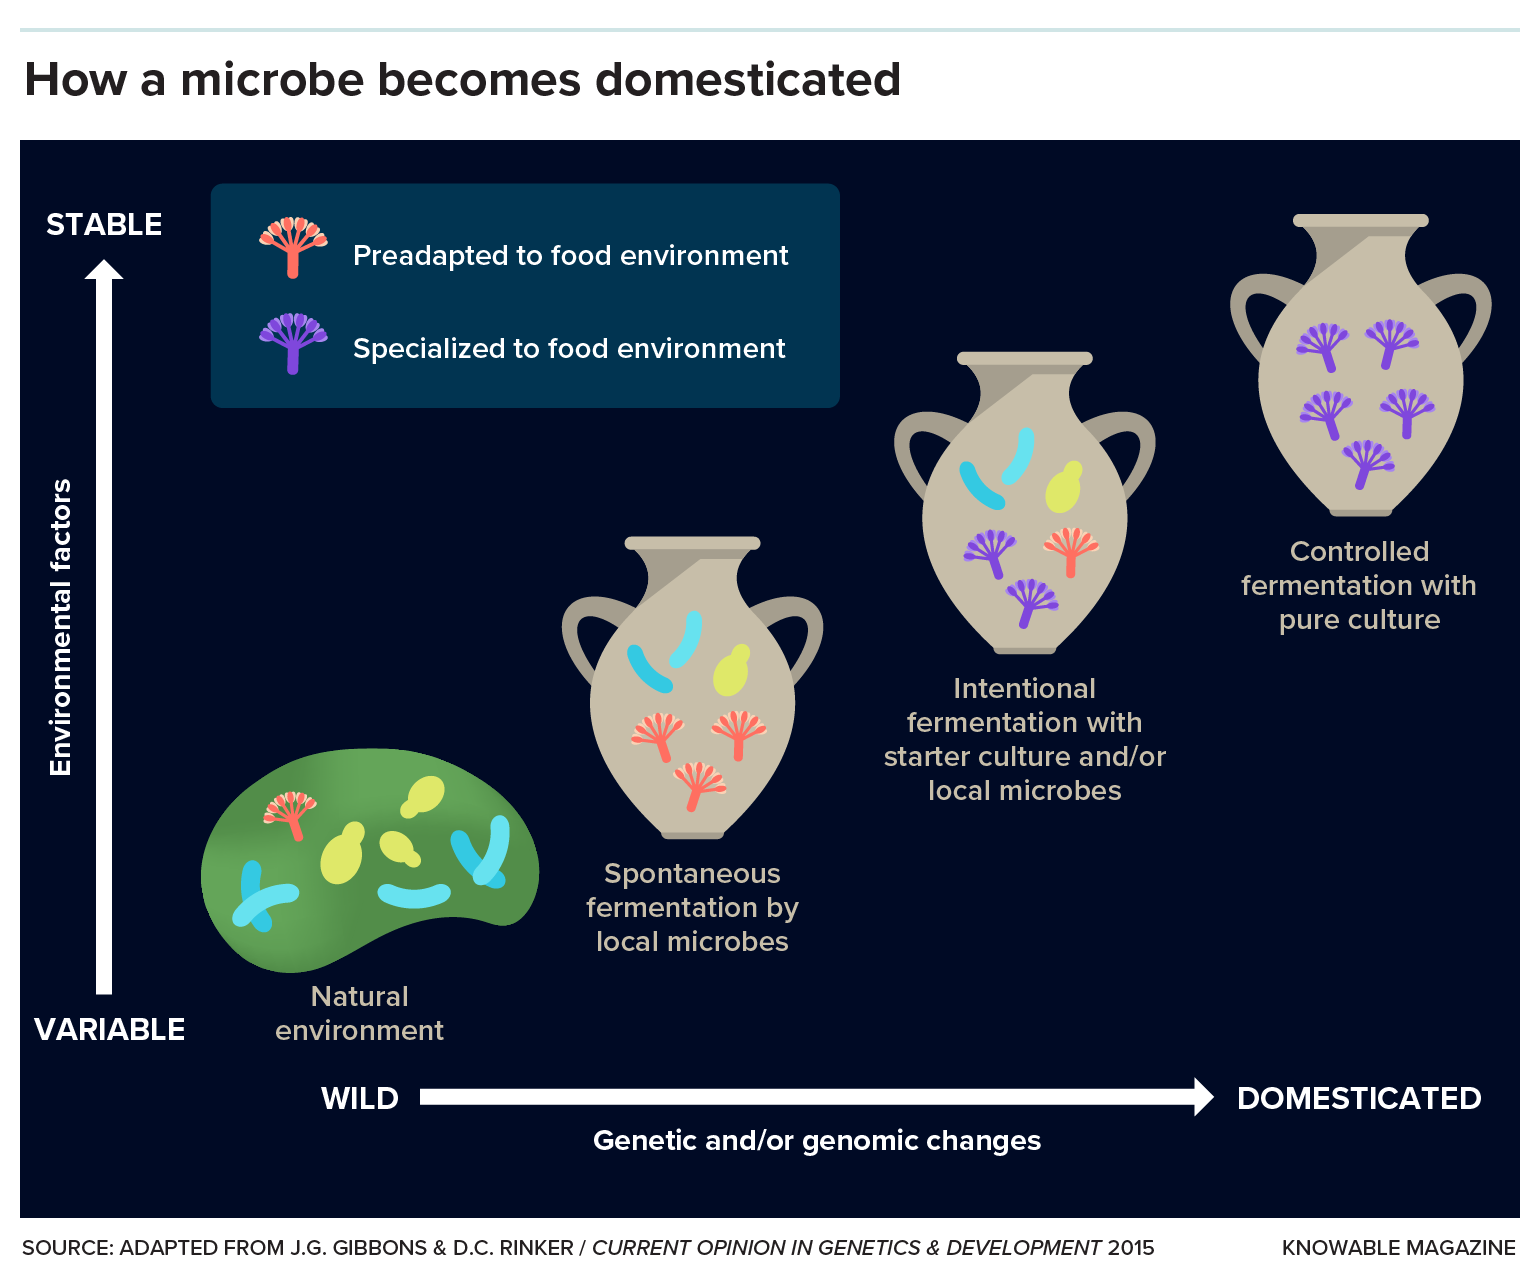 Graphic shows a diverse group of microbes in the wild; the group eventually becomes a monoculture during domestication.